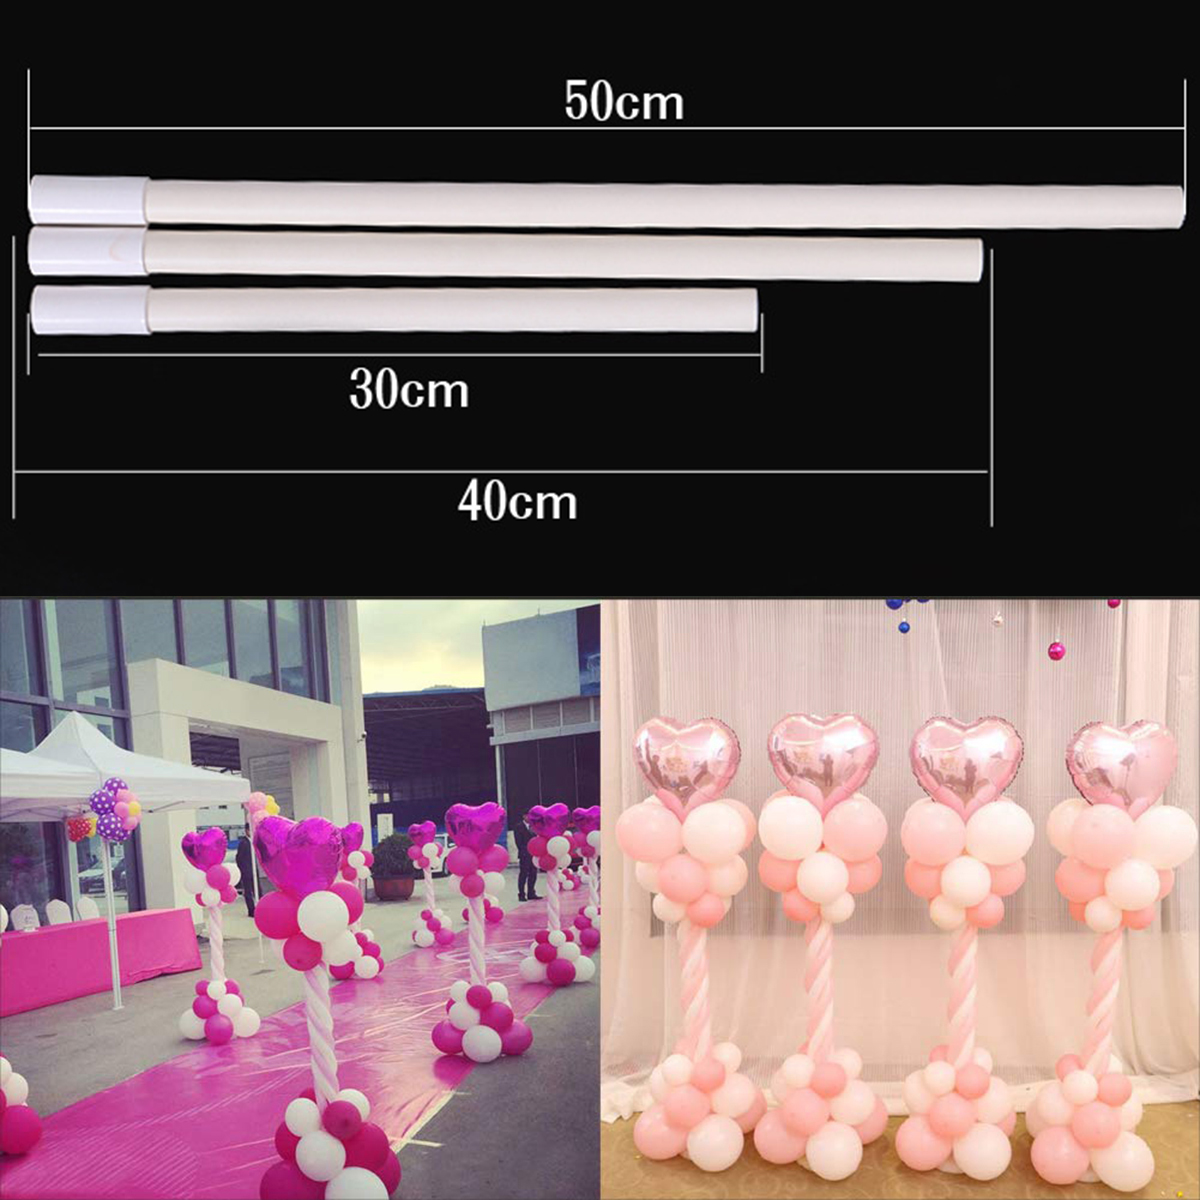 Plastic-Pole-Sticks-for-Arch-Column-Balloons-Base-Stand-Wedding-Party-Decorations-1558232-3